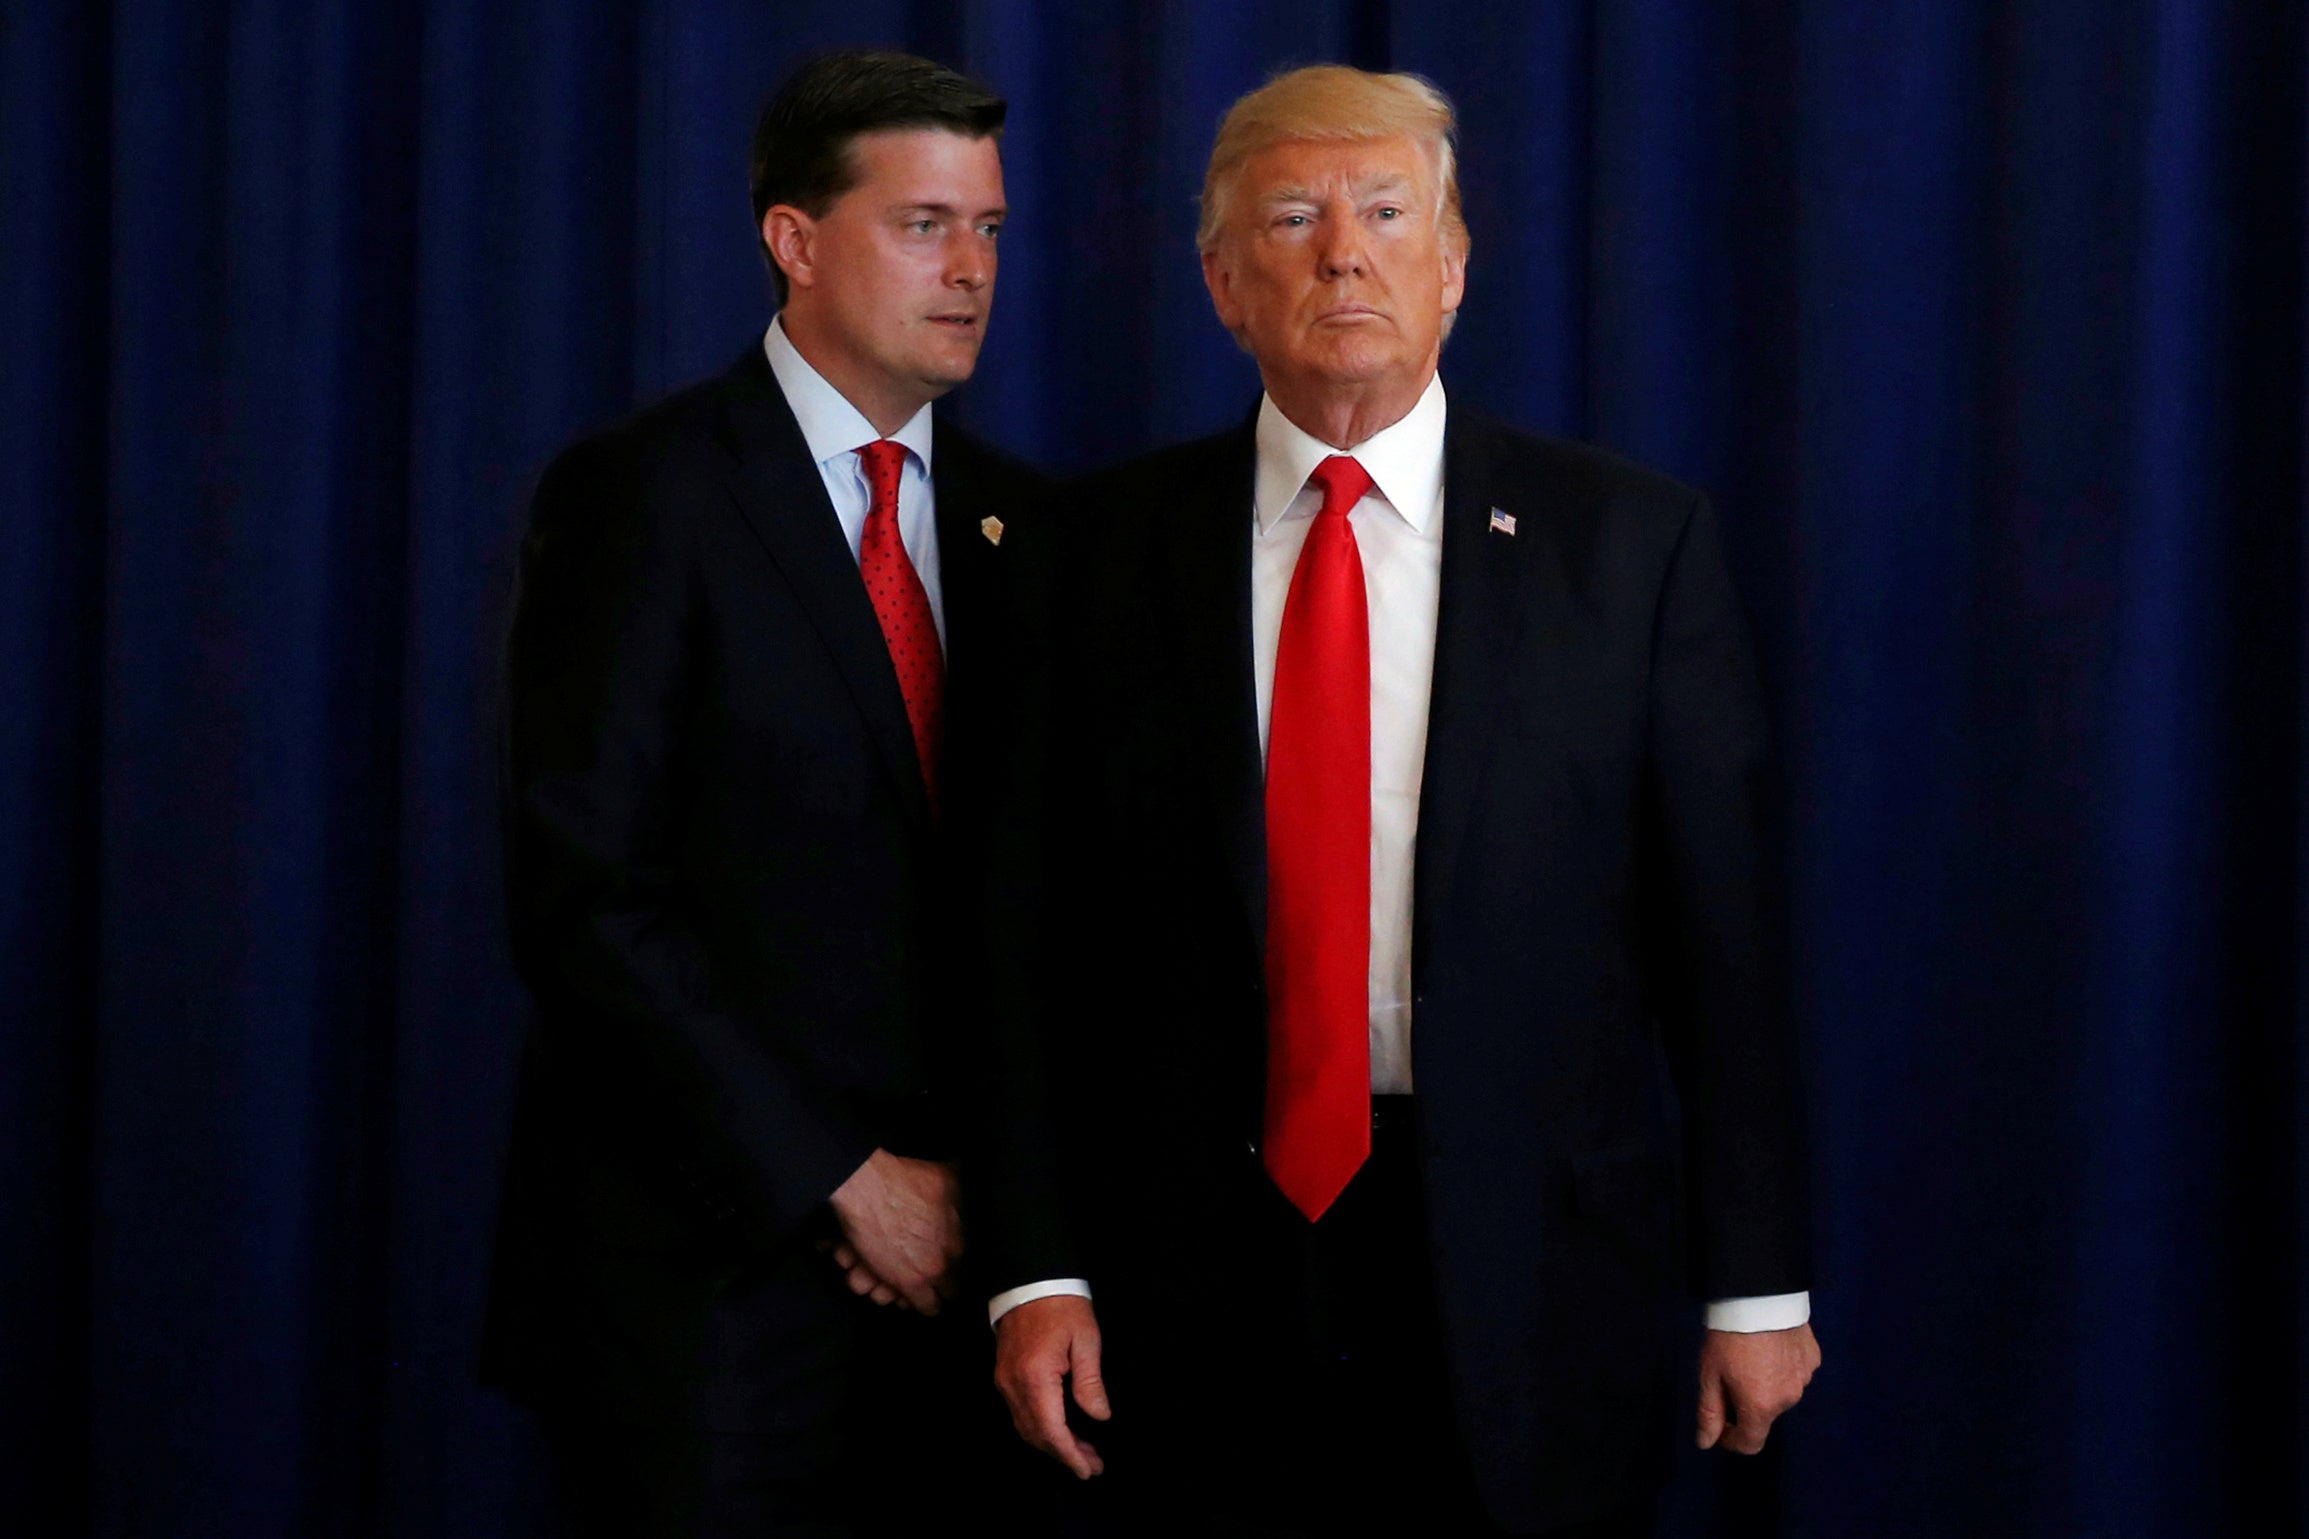 Rob Porter with Donald Trump in Bedminster, New Jersey on Aug. 12, 2017.